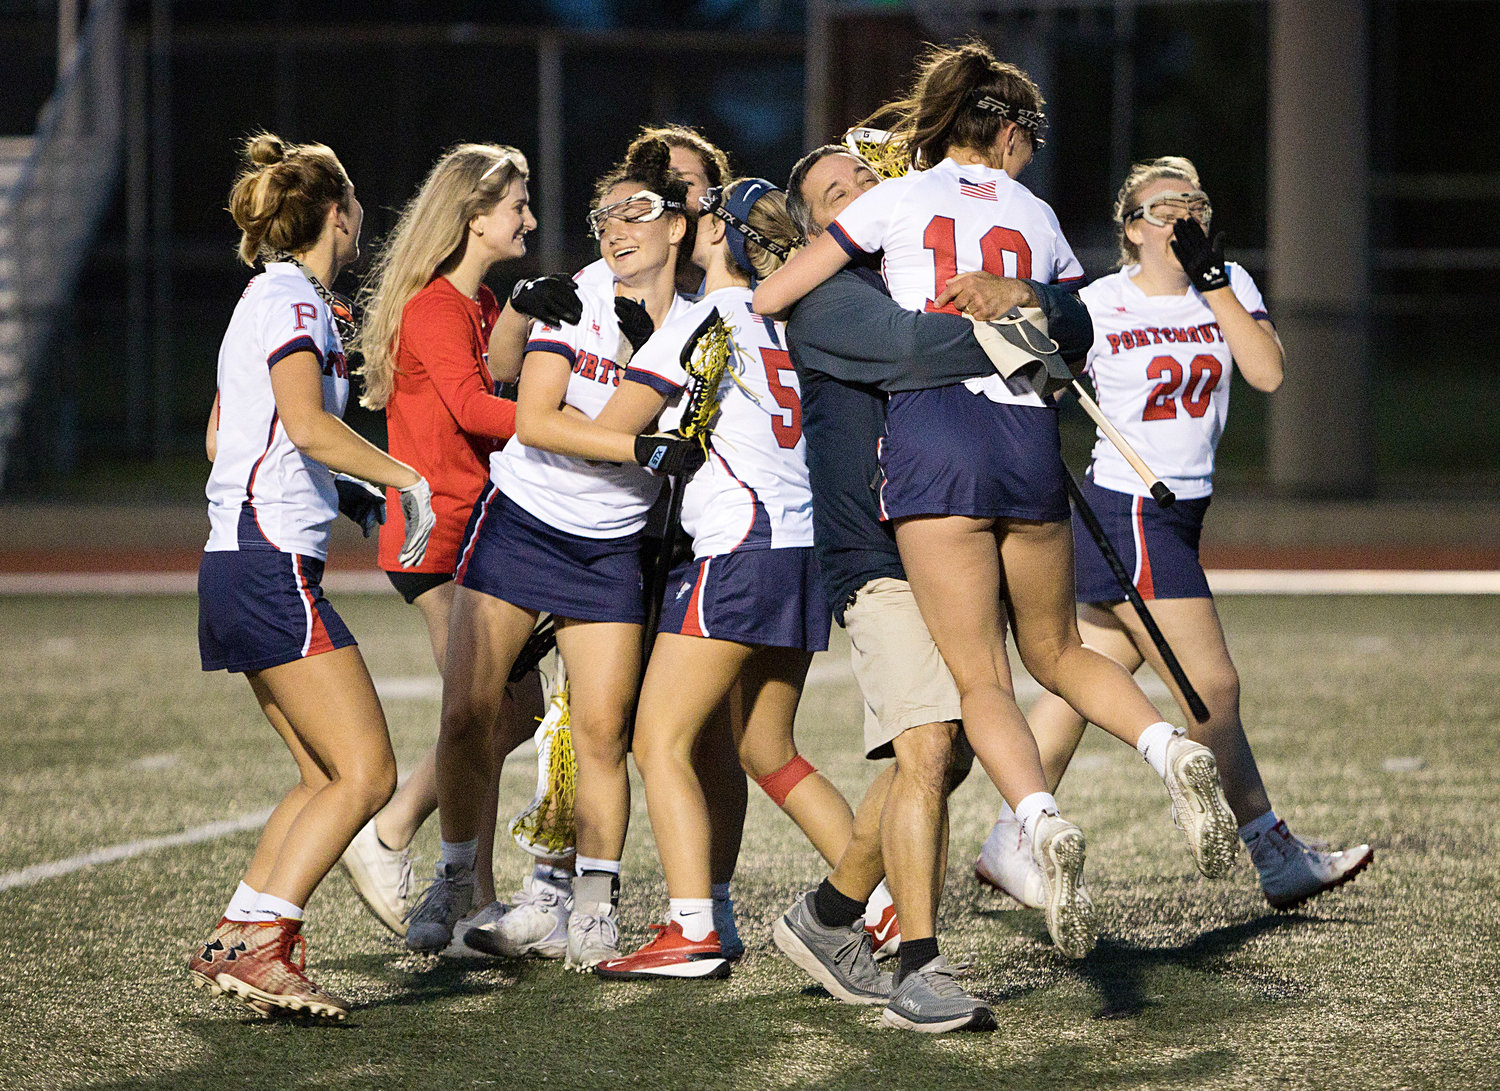 Members of the Portsmouth High School girls’ lacrosse team celebrate after storming back to beat Cranston West in the semifinals on Tuesday.